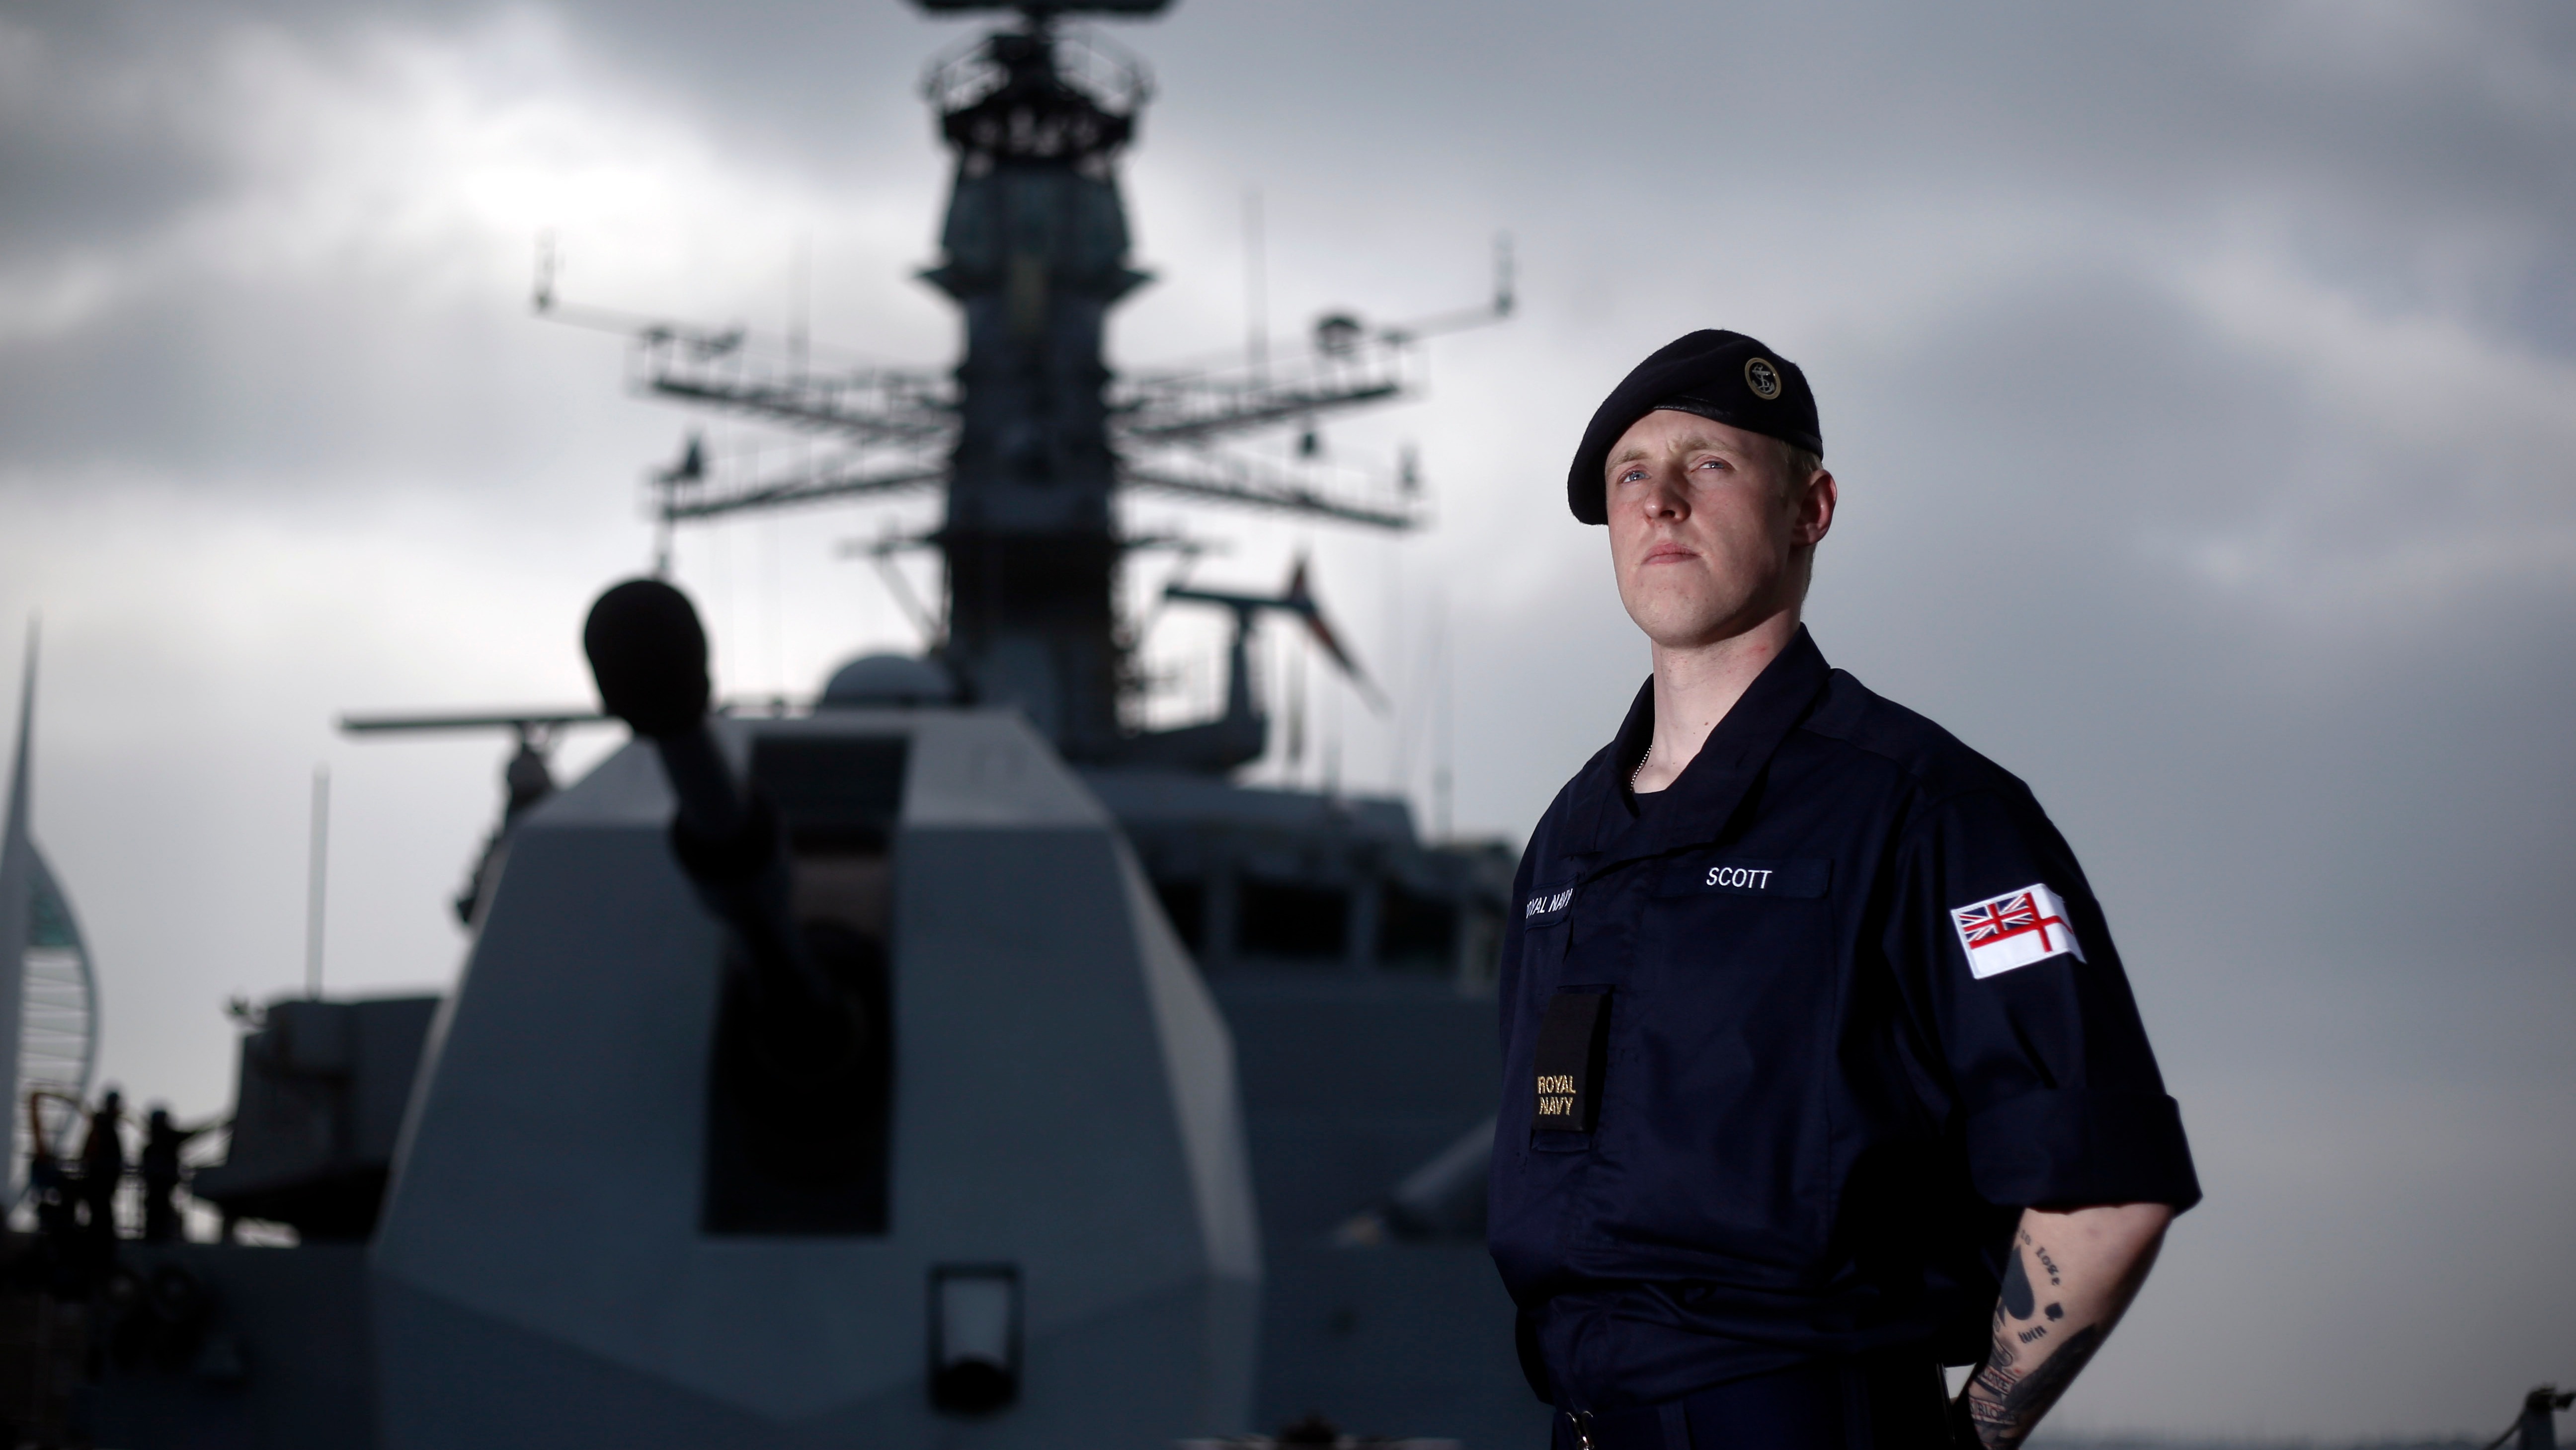 Royal Navy unveils first uniform change for 70 years | ITV News